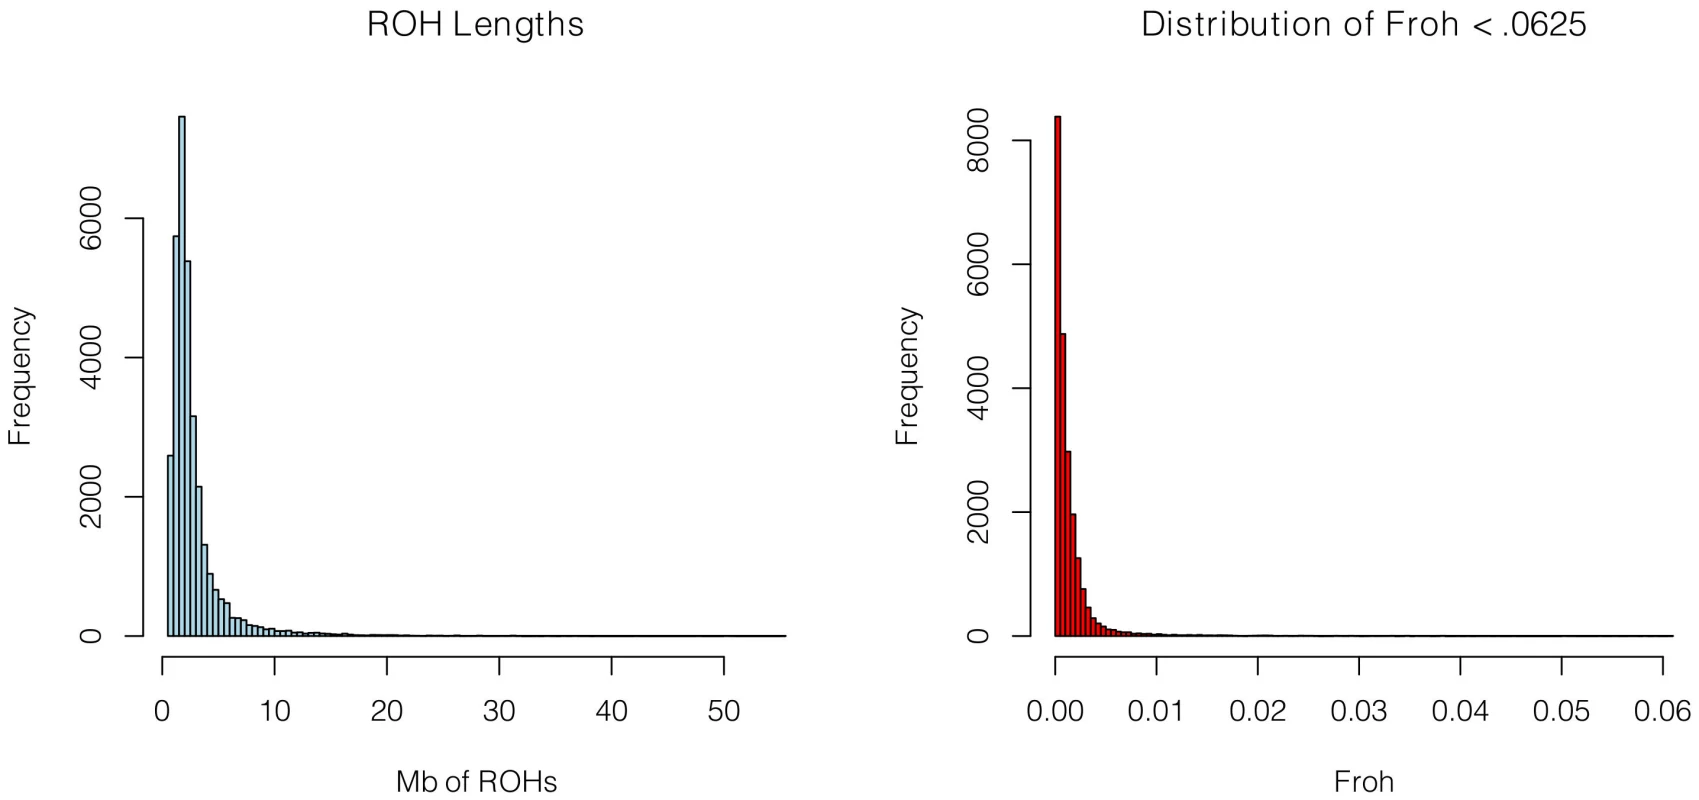 Distributions of ROH Lengths (left) and <i>Froh</i> (right) in the total sample.